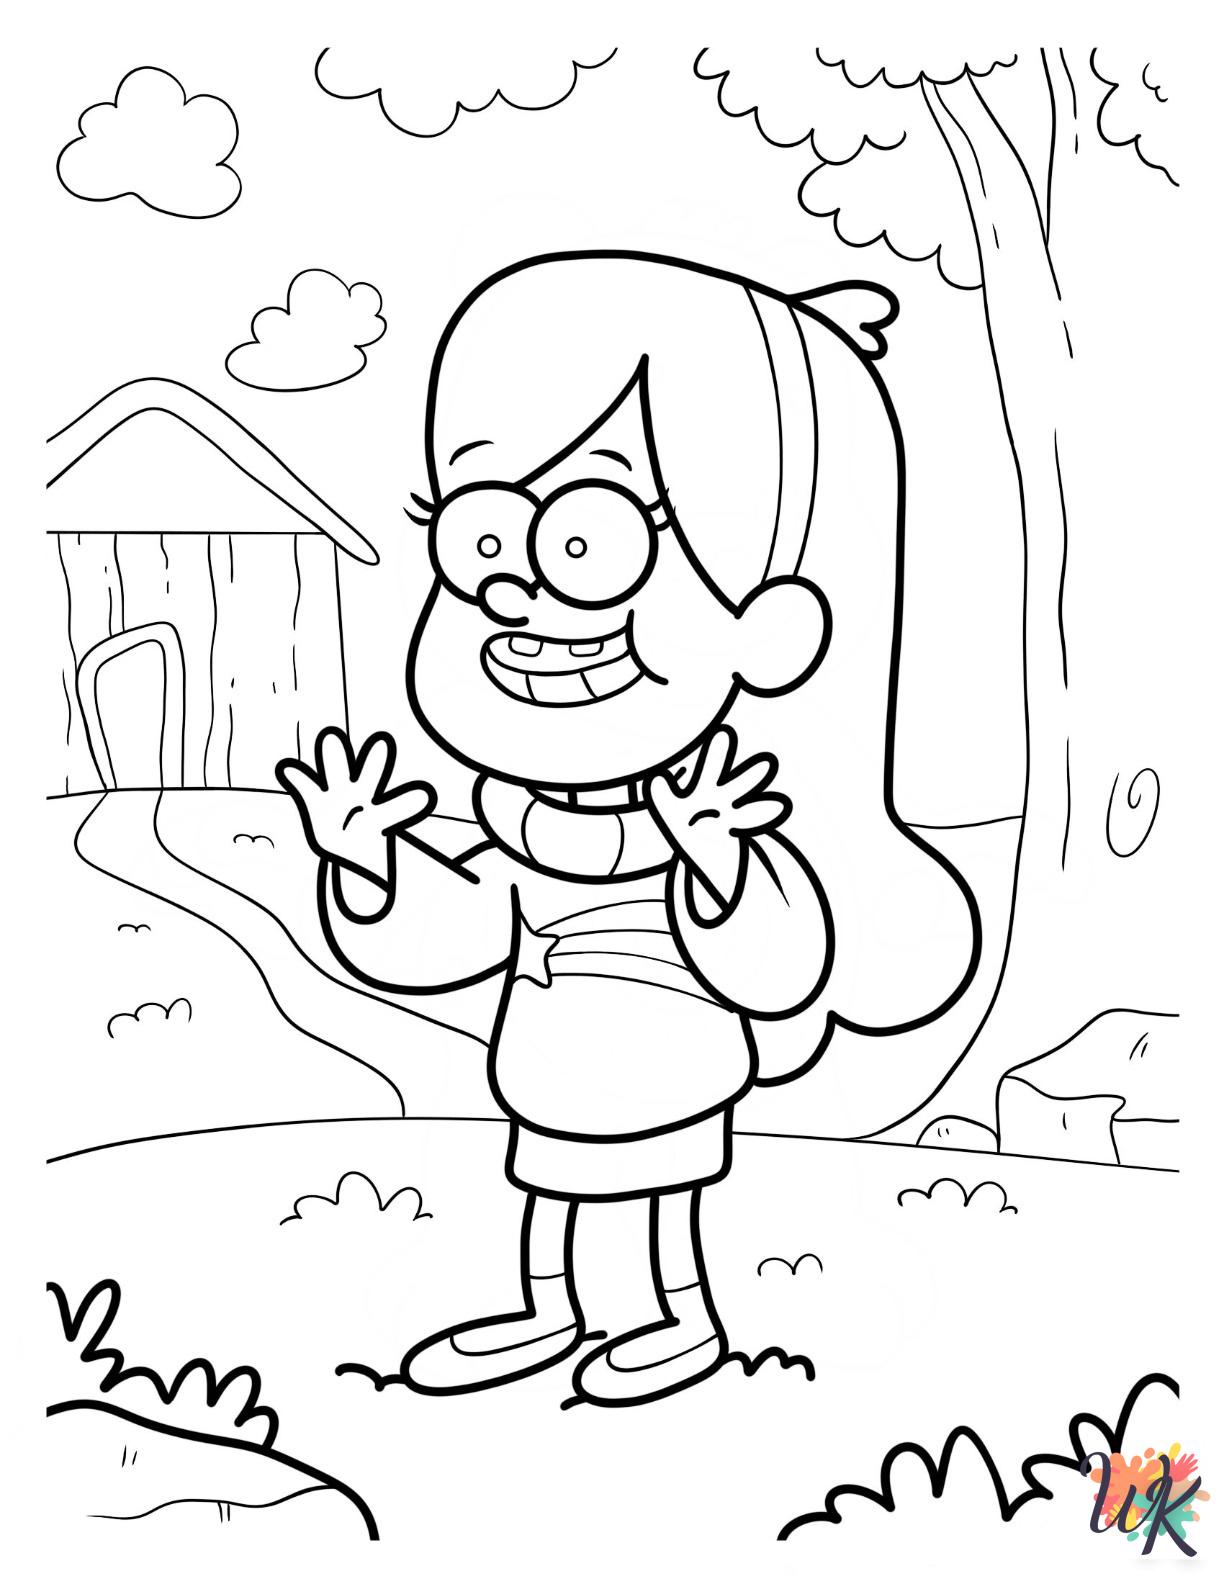 Gravity Falls Coloring Pages 22